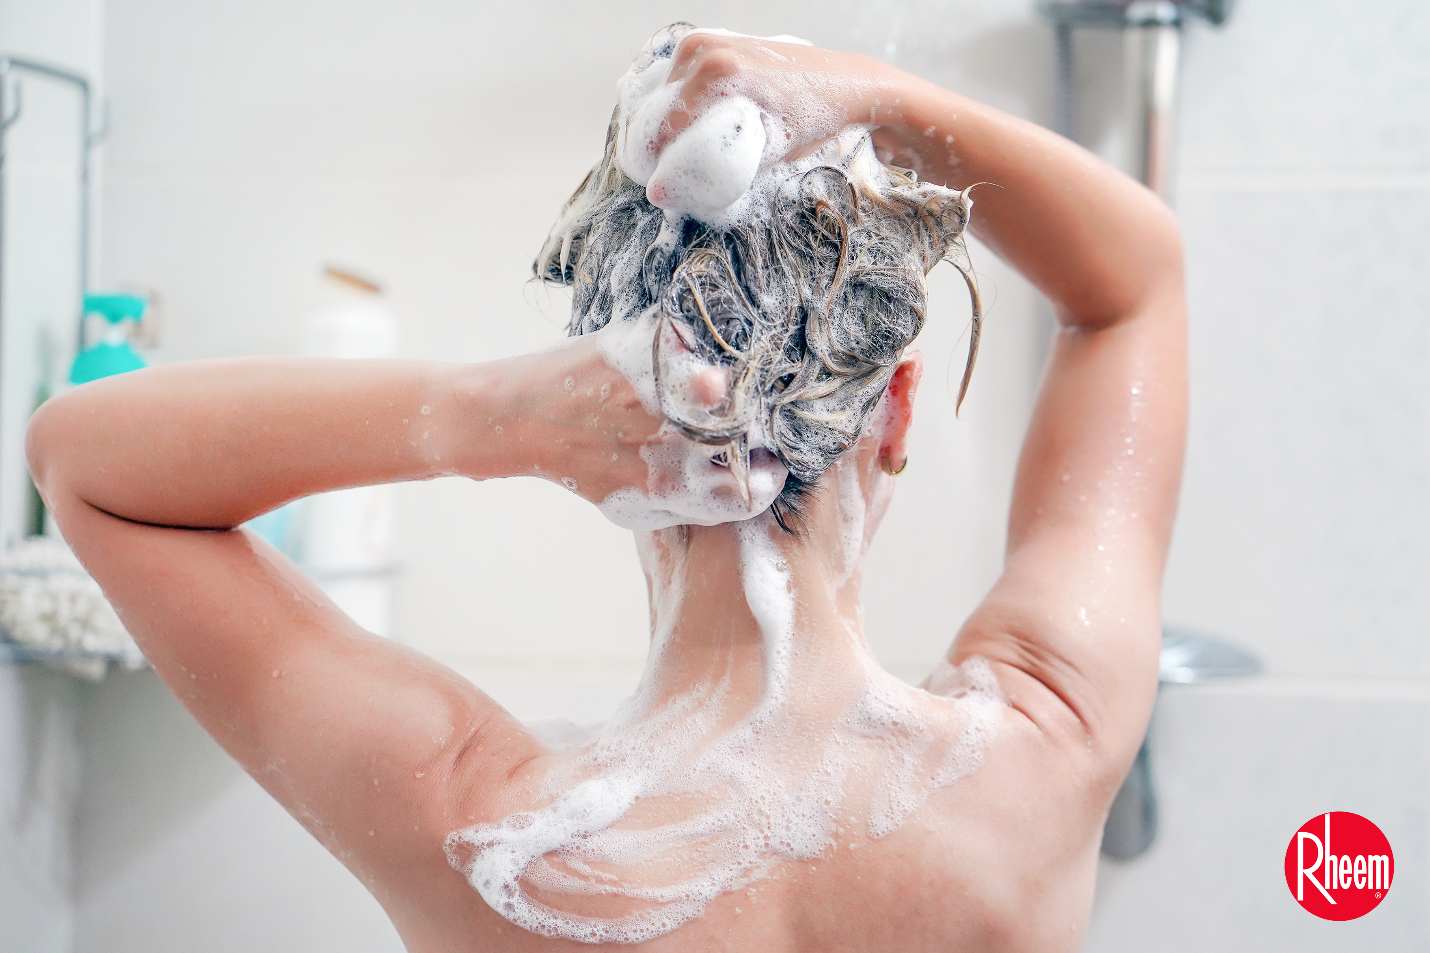 Should I Wash My Hair with Hot or Cold Water? - Rheem Asia